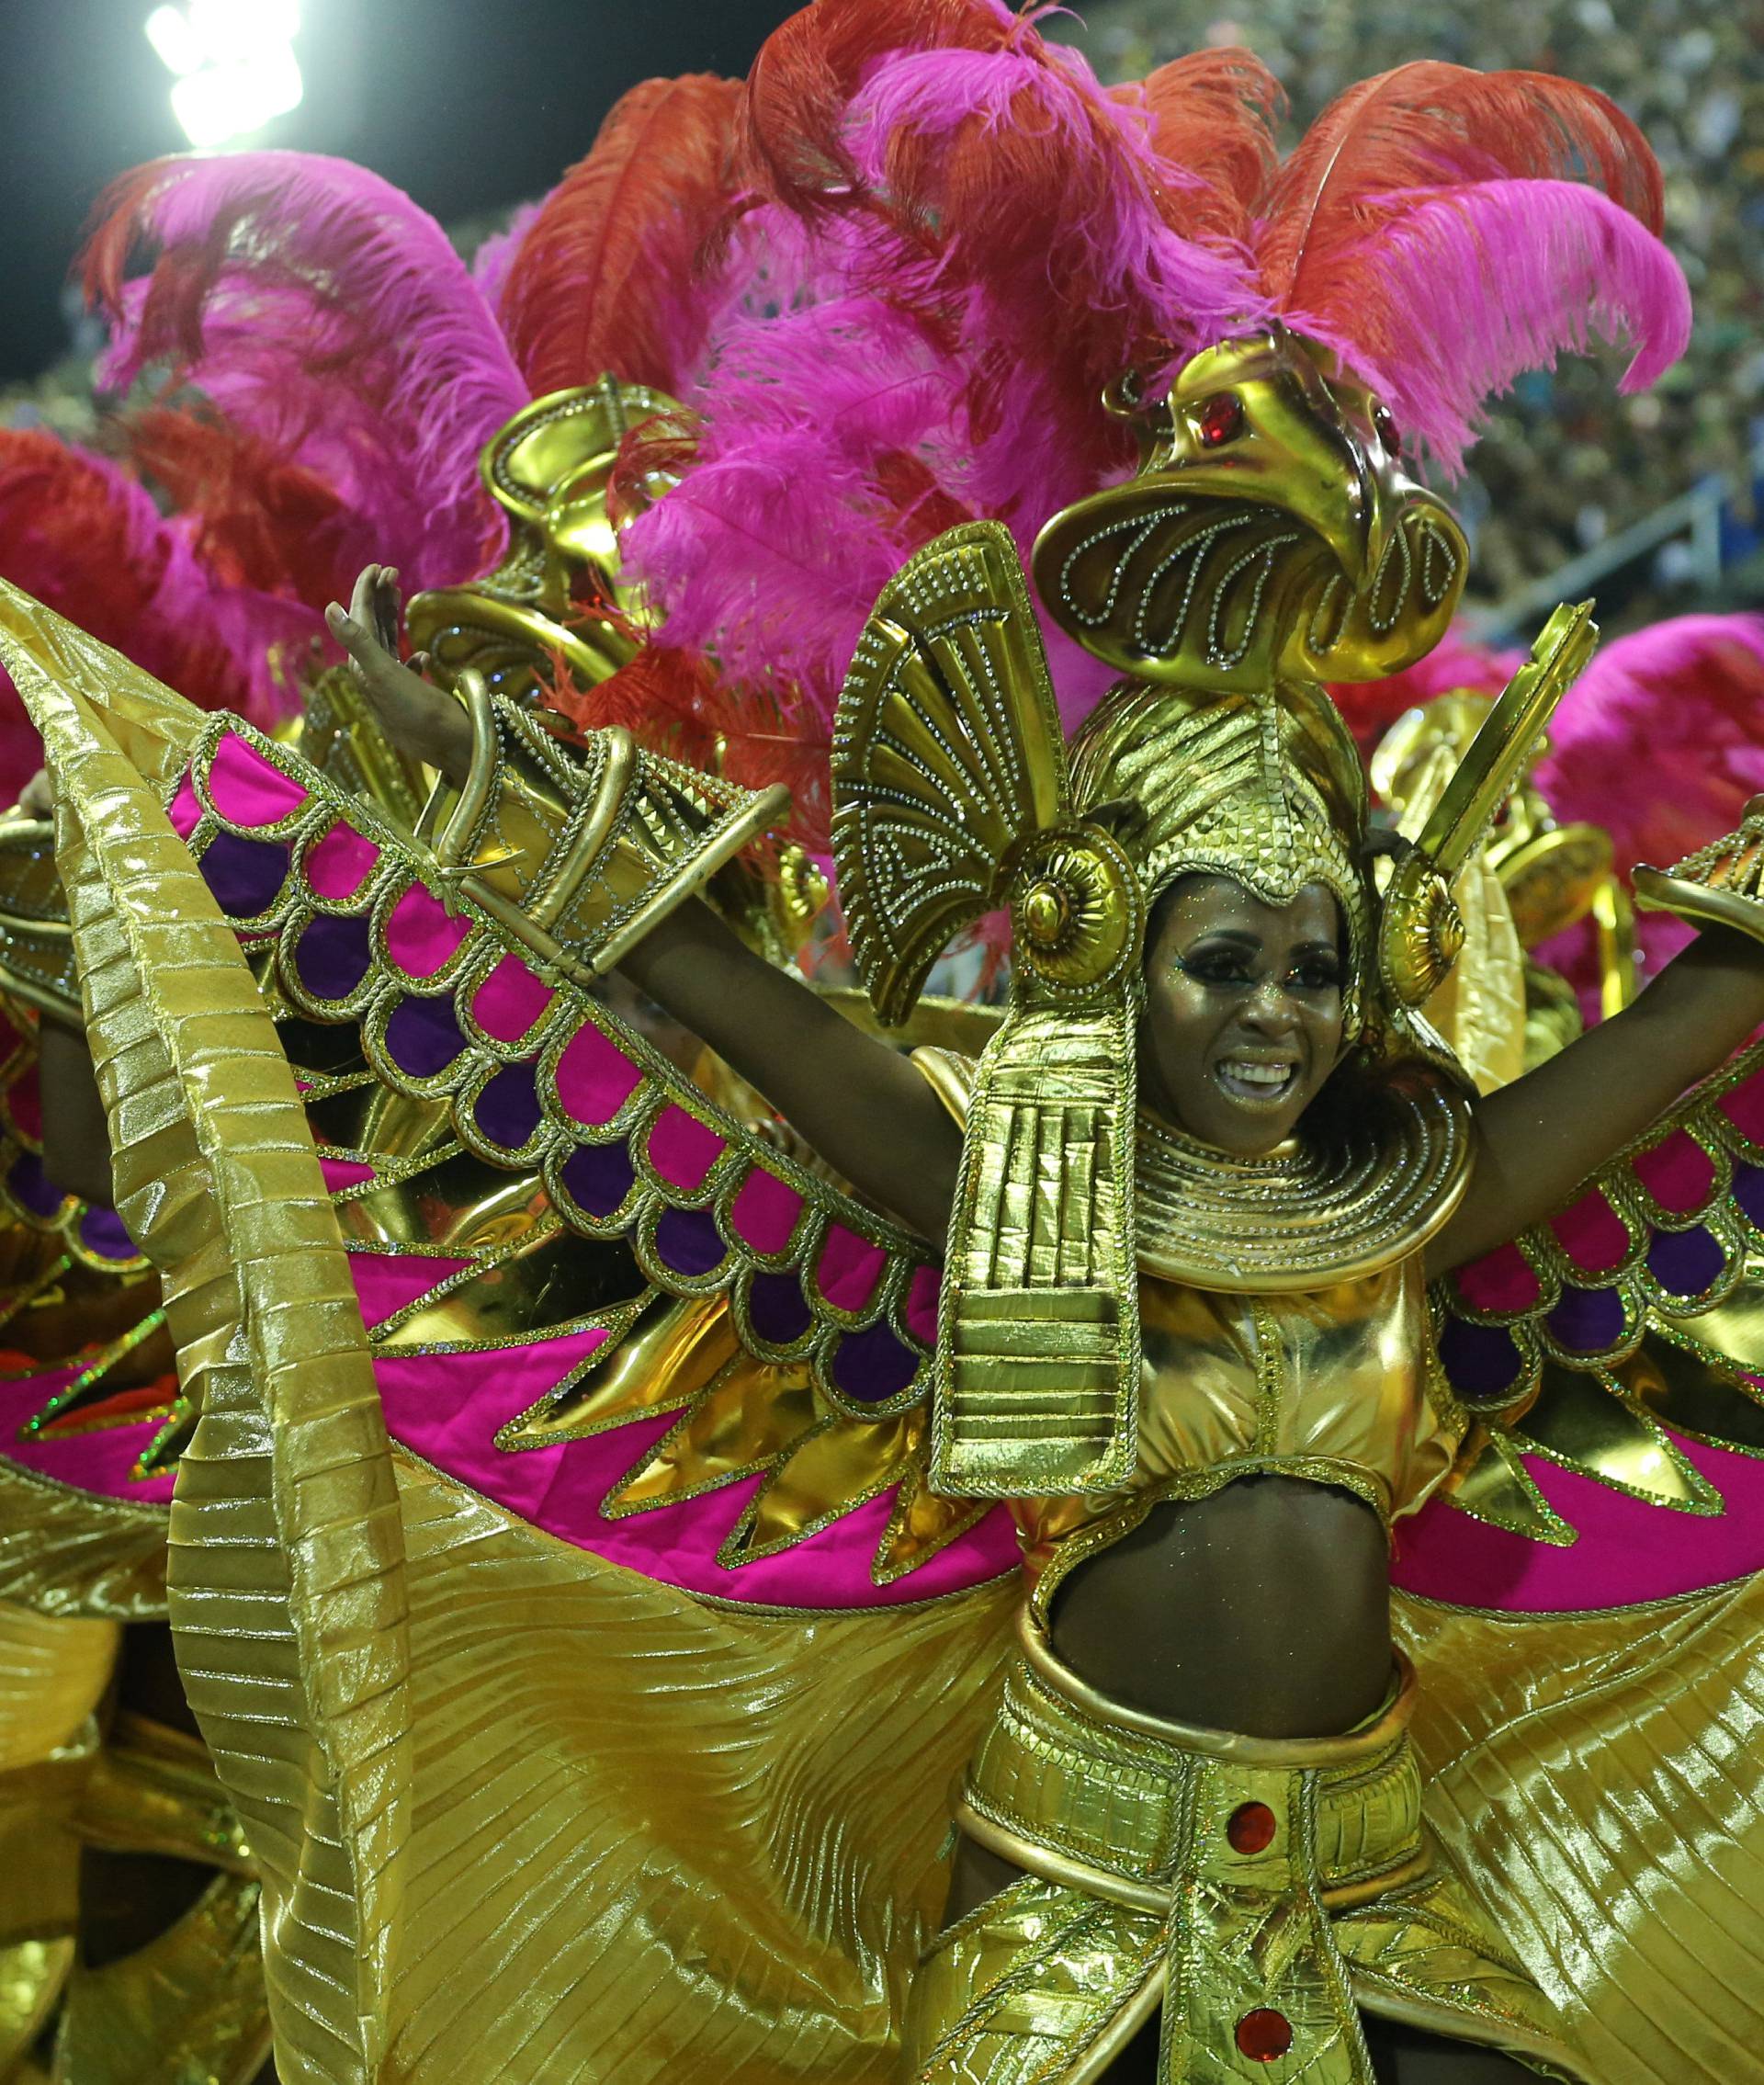 A reveller from Salgueiro performs during the second night of the Carnival parade at the Sambadrome in Rio de Janeiro